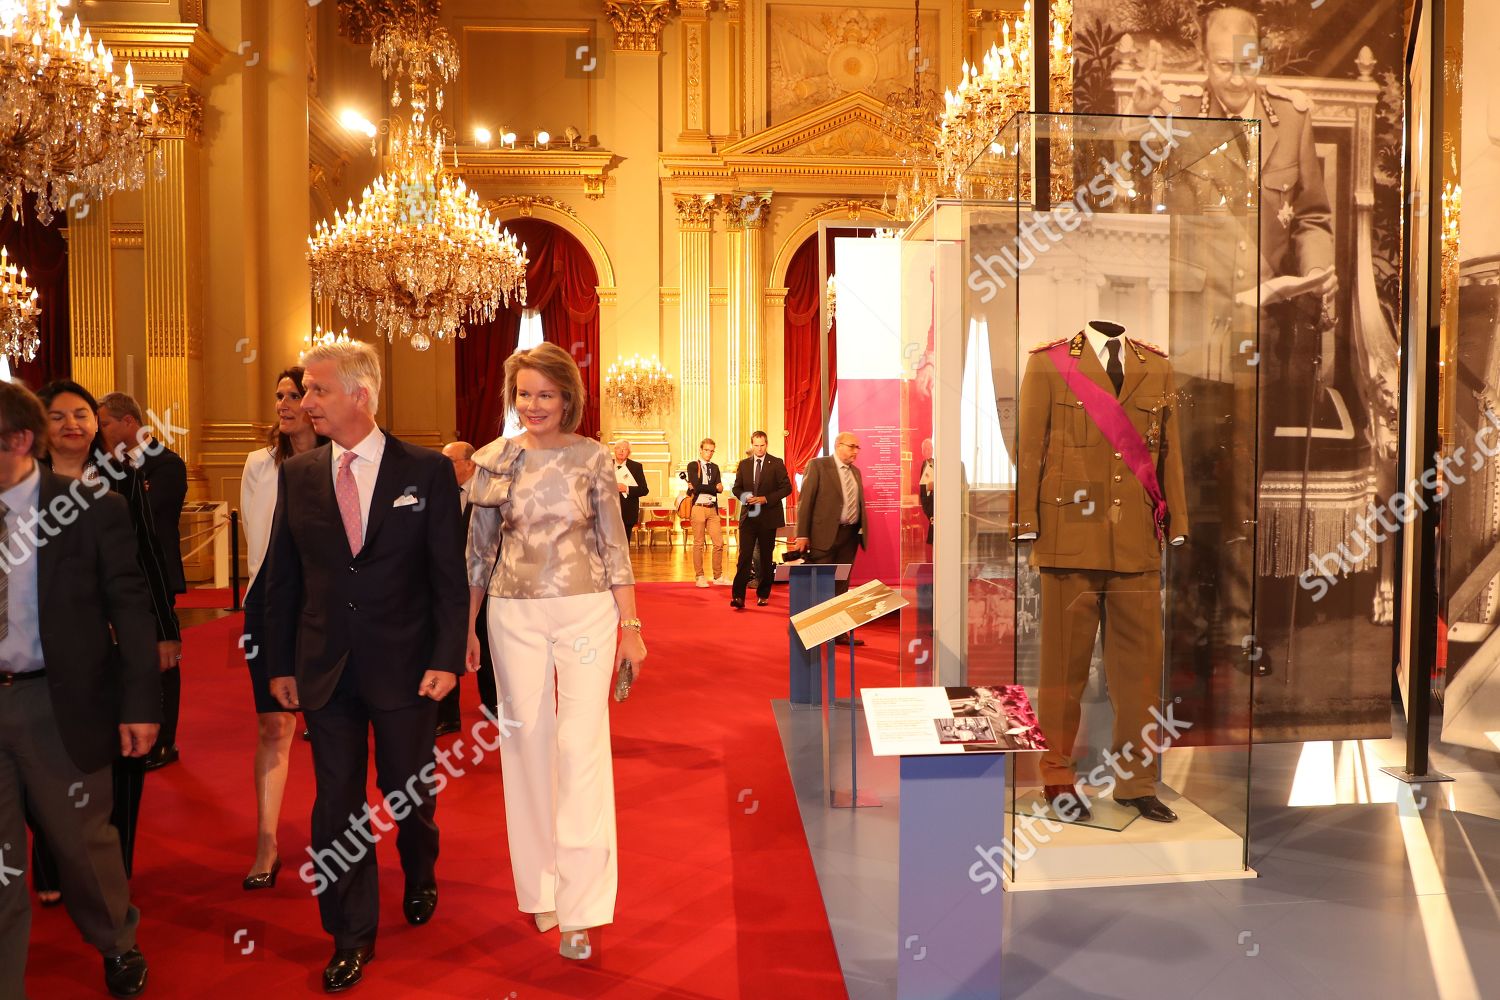 belgian-royals-summer-expo-at-the-royal-palace-brussels-belgium-shutterstock-editorial-10340779i.jpg